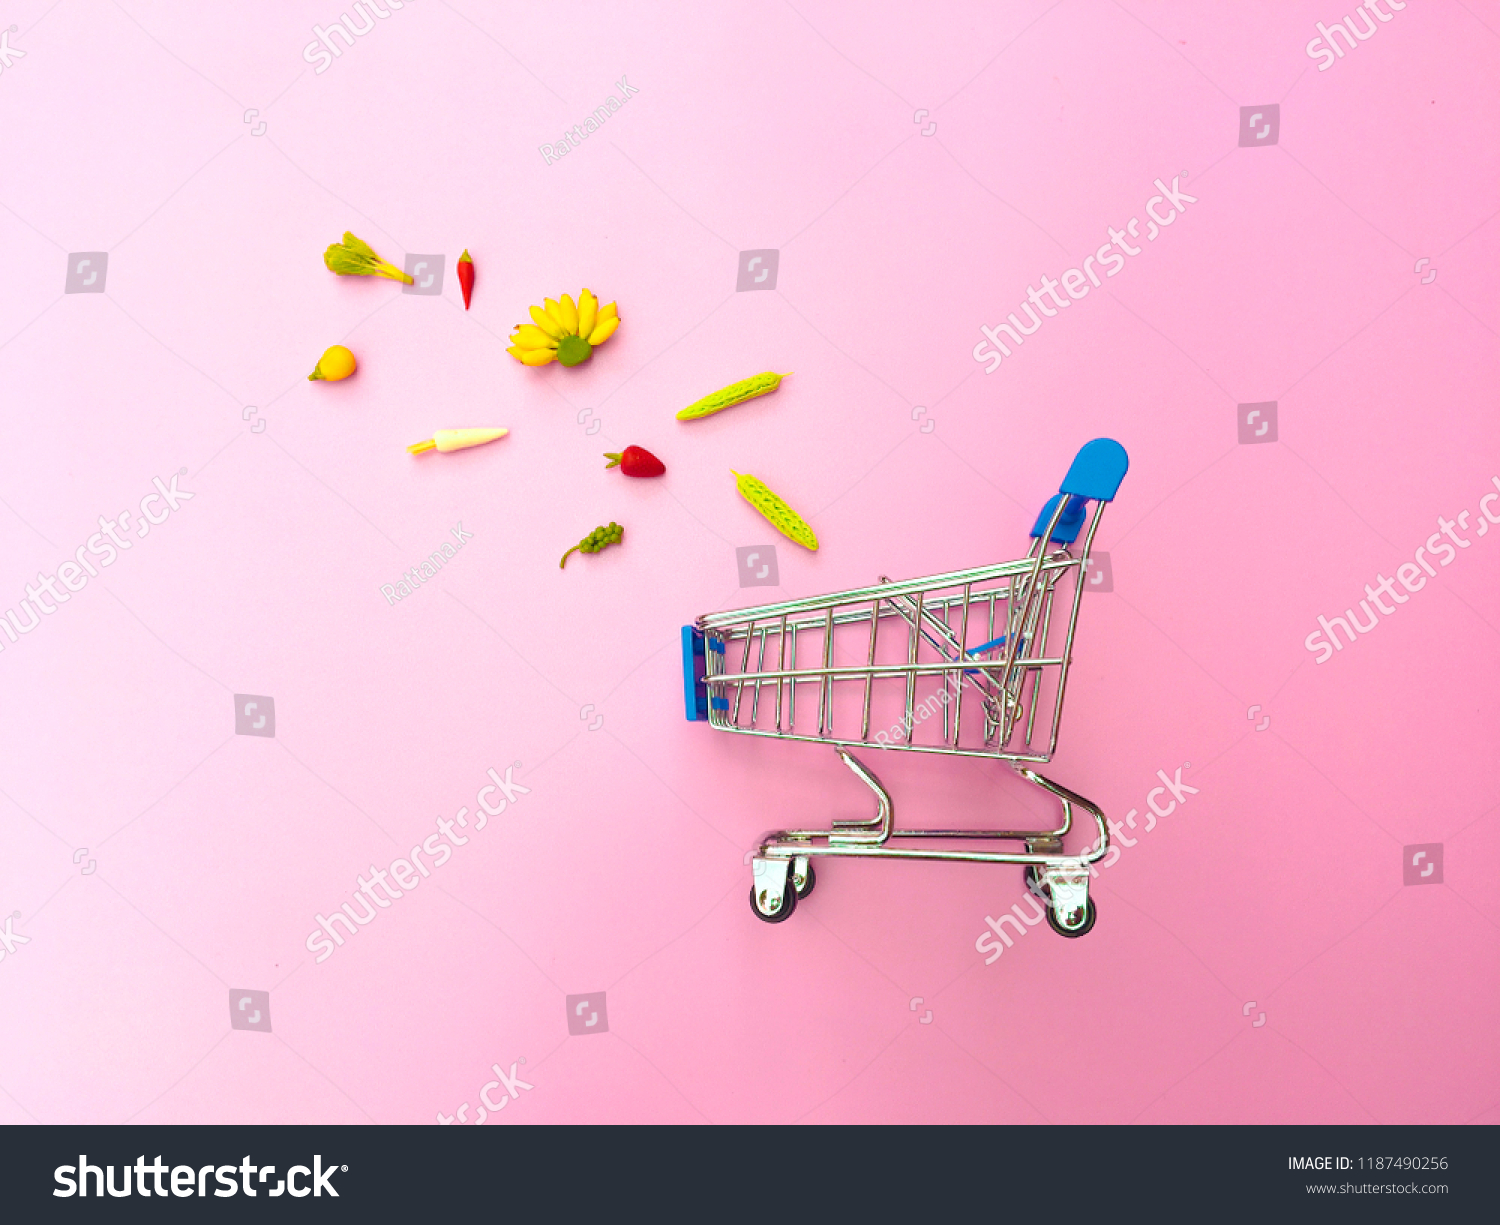 Ideas Online Shopping Pink Background Shopping Stock Photo Edit Now 1187490256